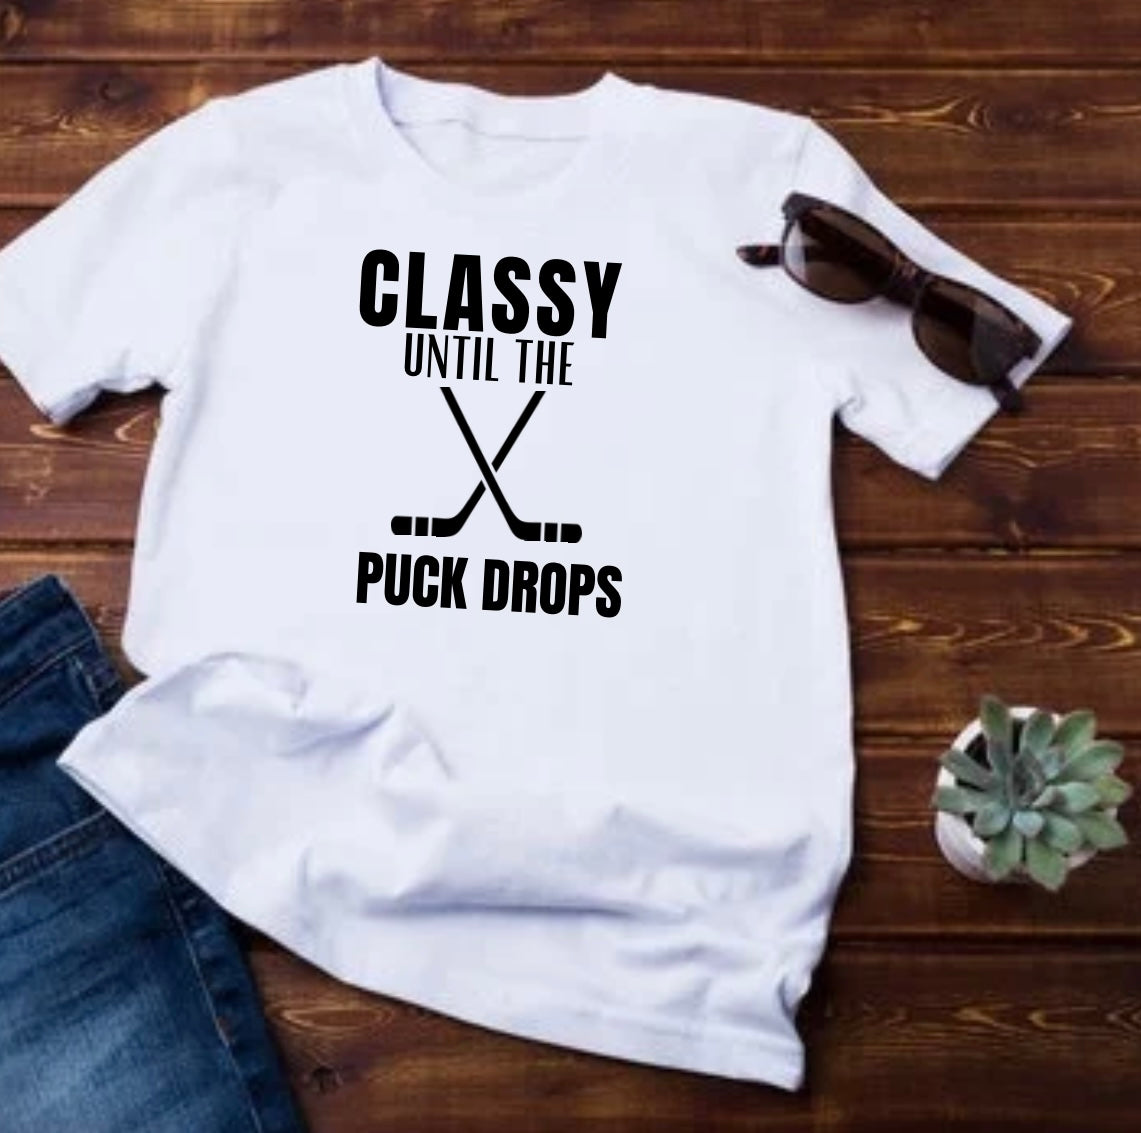 Classy Until the Puck Drops Tee